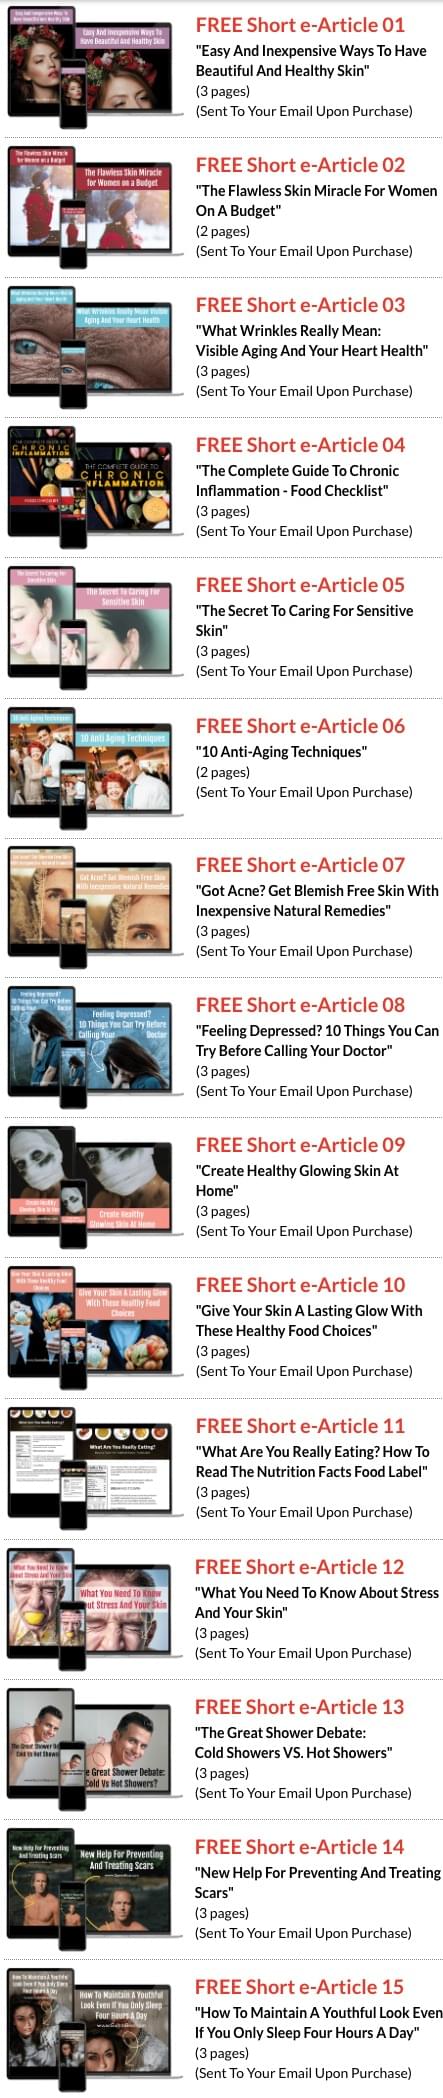 GummBear - Free 15 e-Articles Offer When You Buy Now!